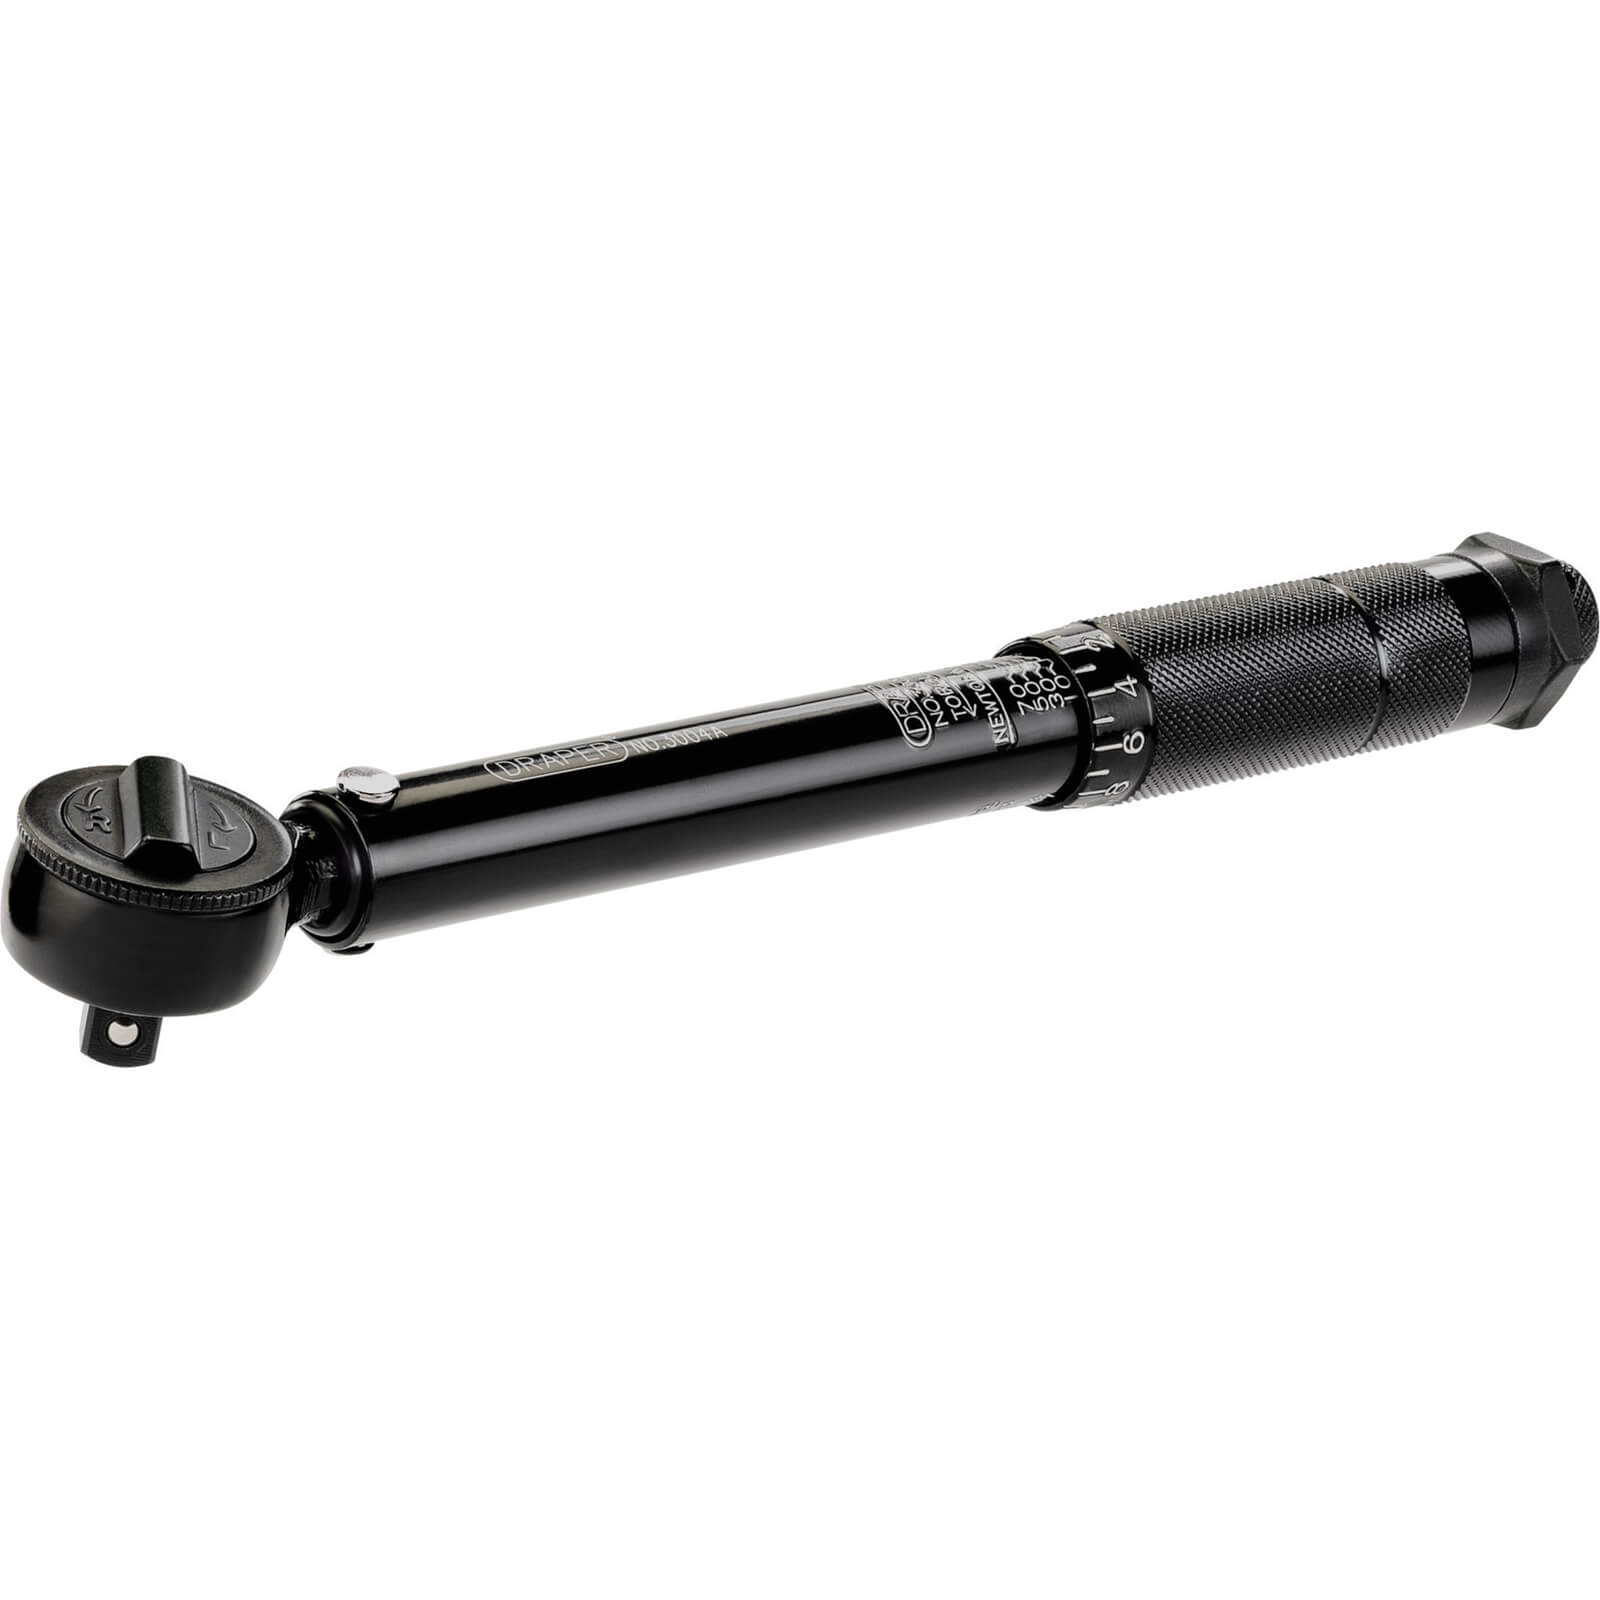 Image of Draper 3004A/BK 3/8" Drive Ratchet Torque Wrench 3/8" 10Nm - 80Nm